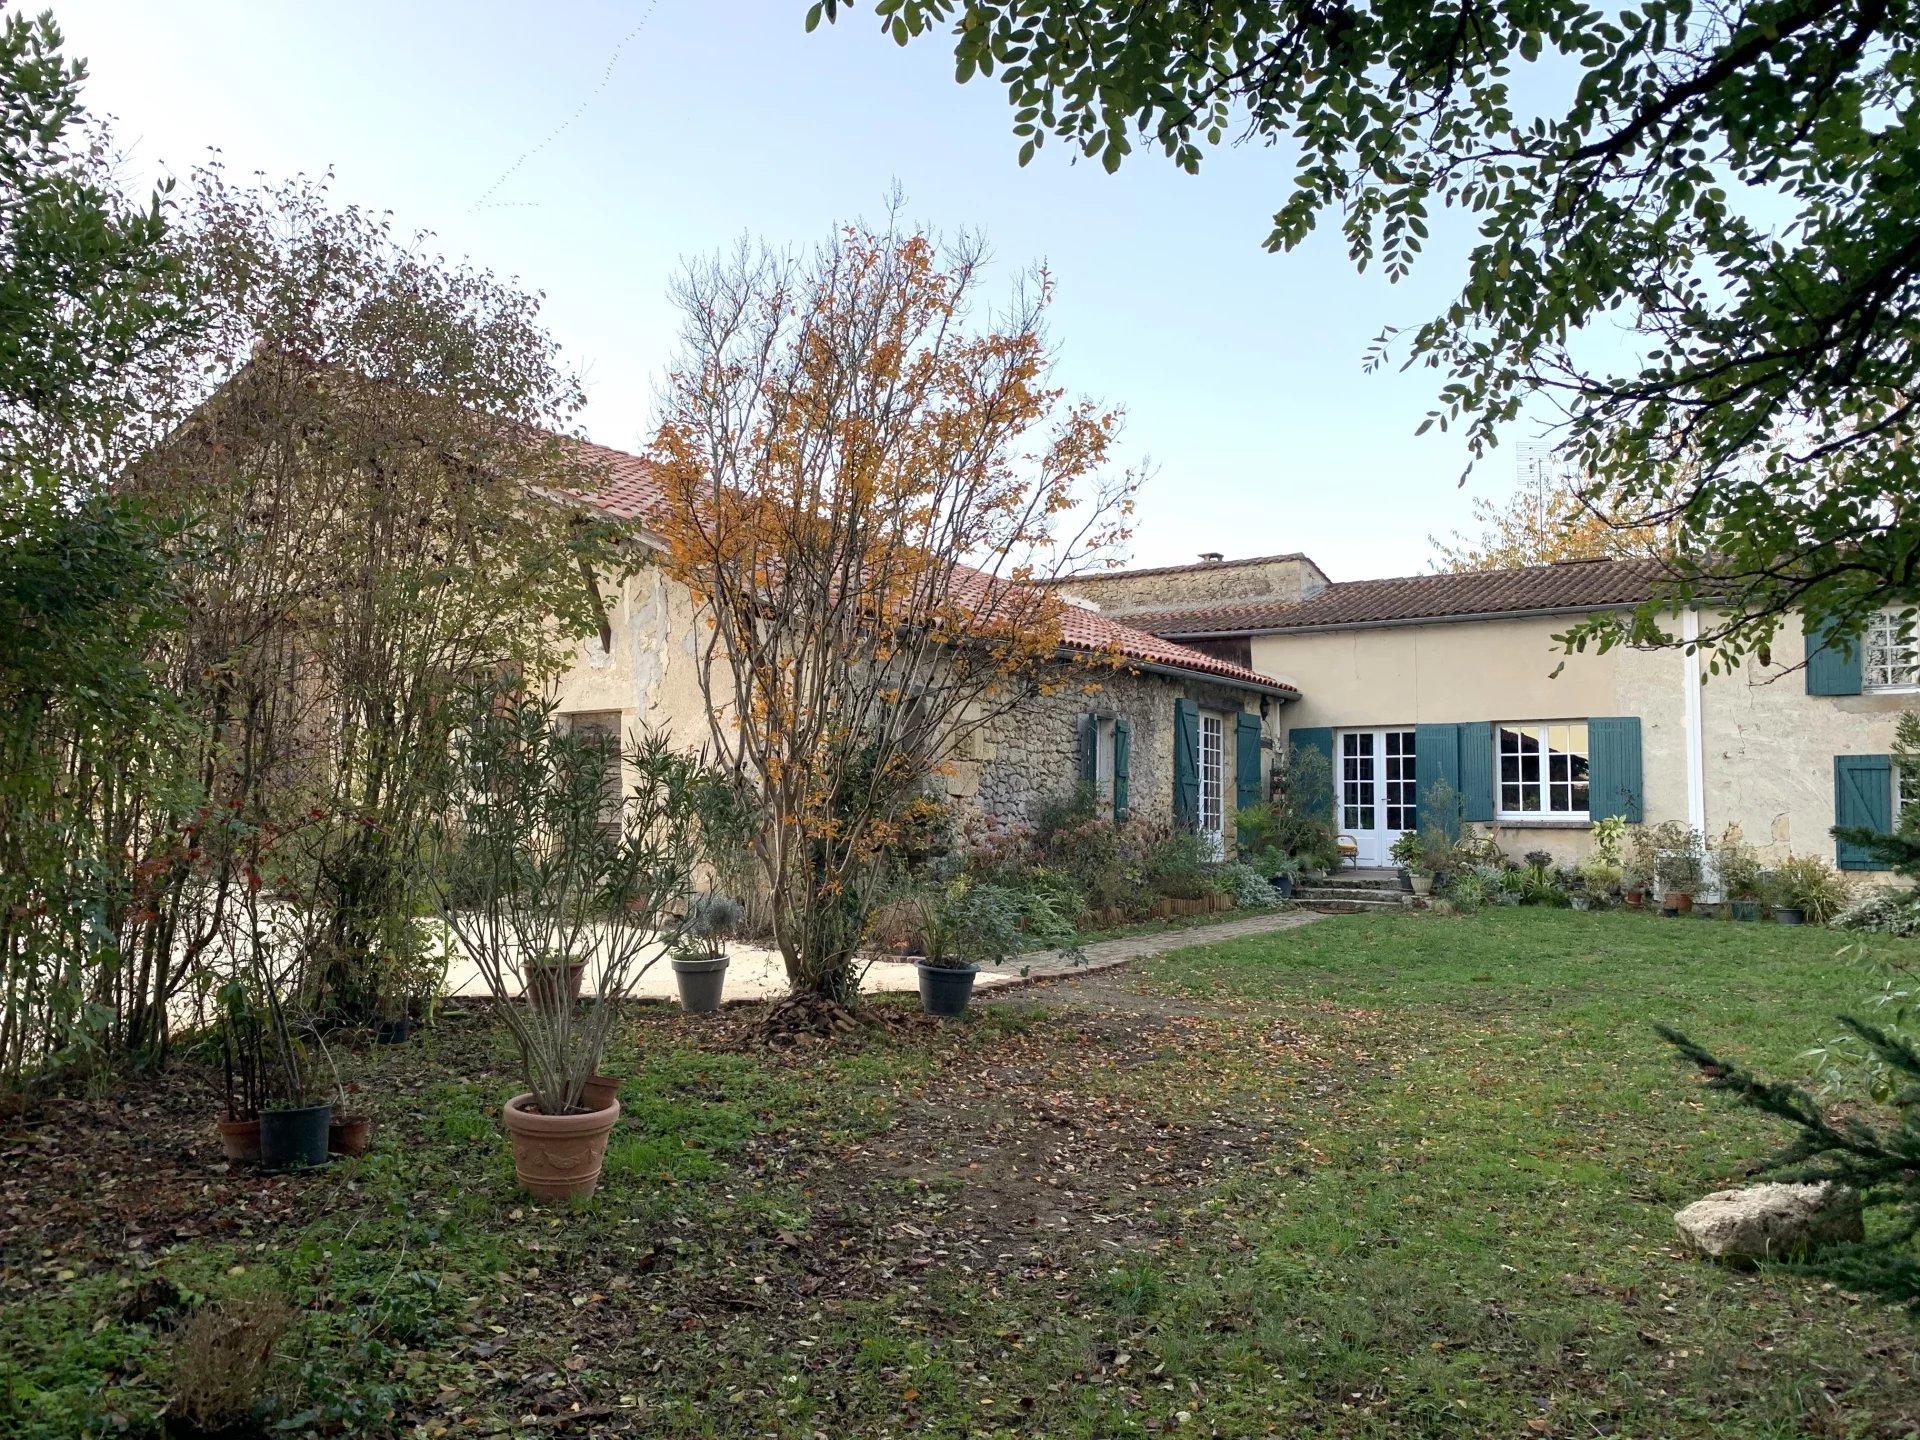 19th Century Country Farmhouse at the edge of village, within 1hr of Bordeaux